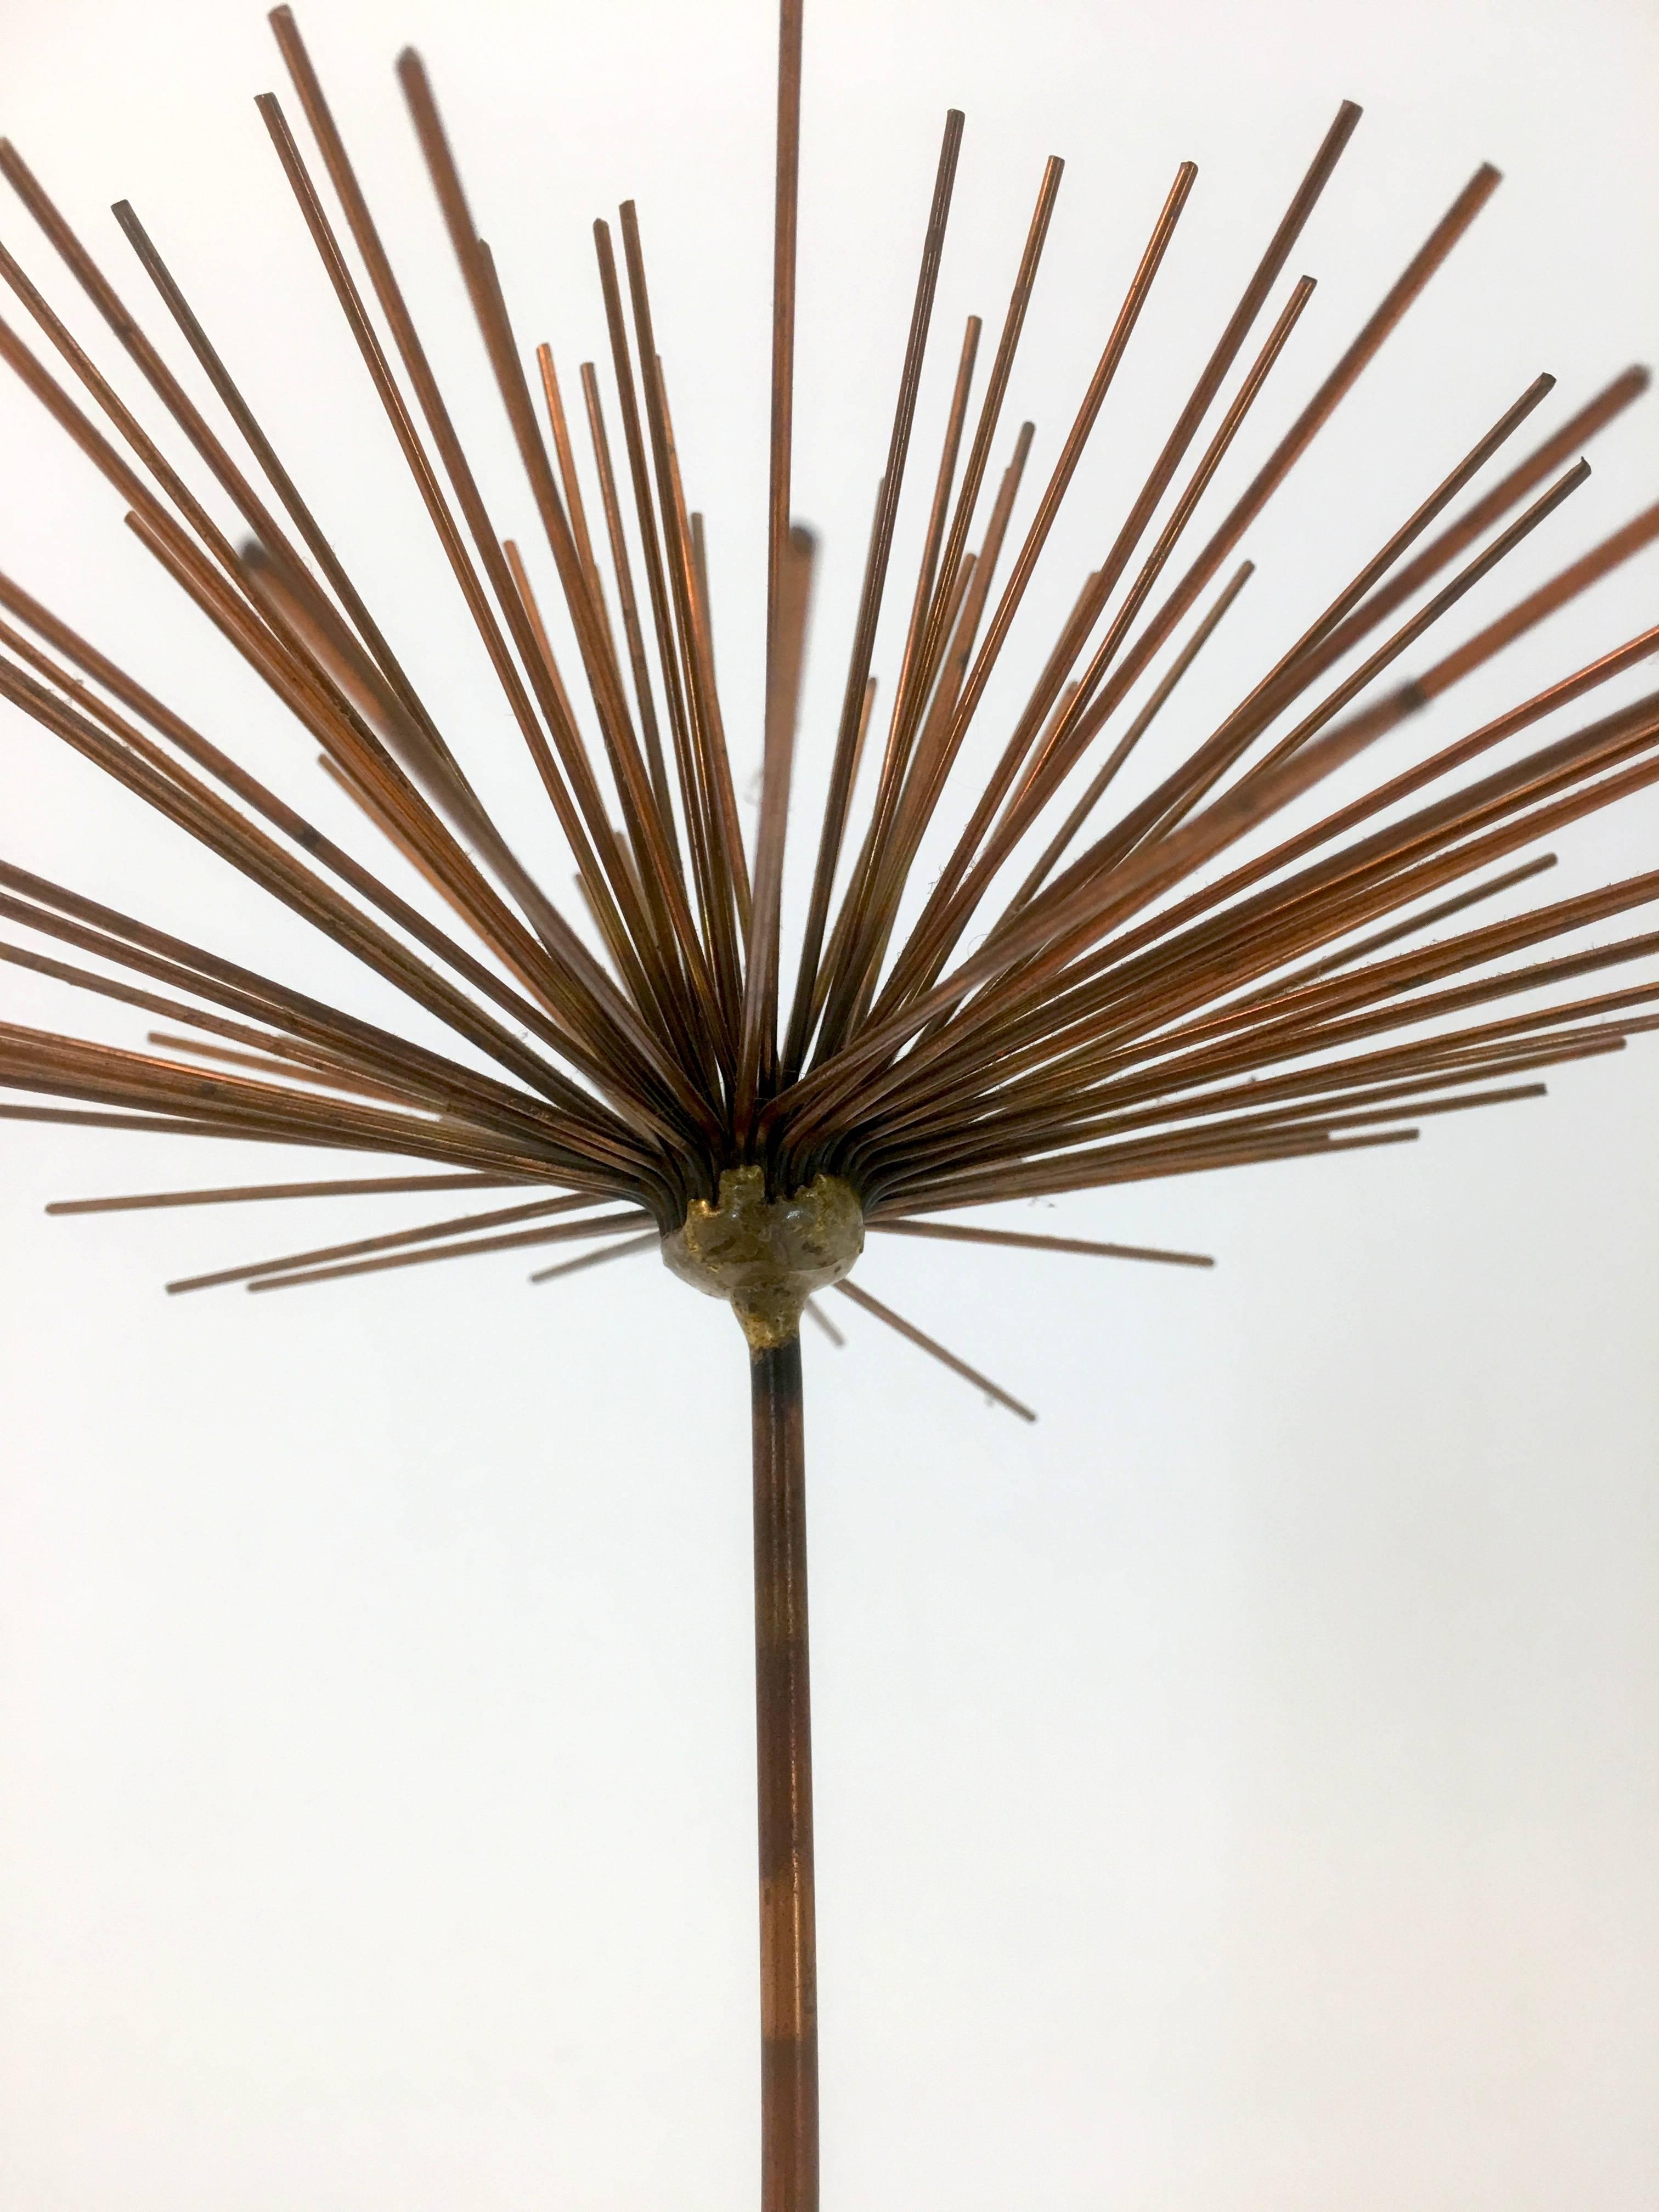 Mid-Century Modern Exquisite Dandelion Flower Sculpture with Onyx by Curtis Jere Artisan House